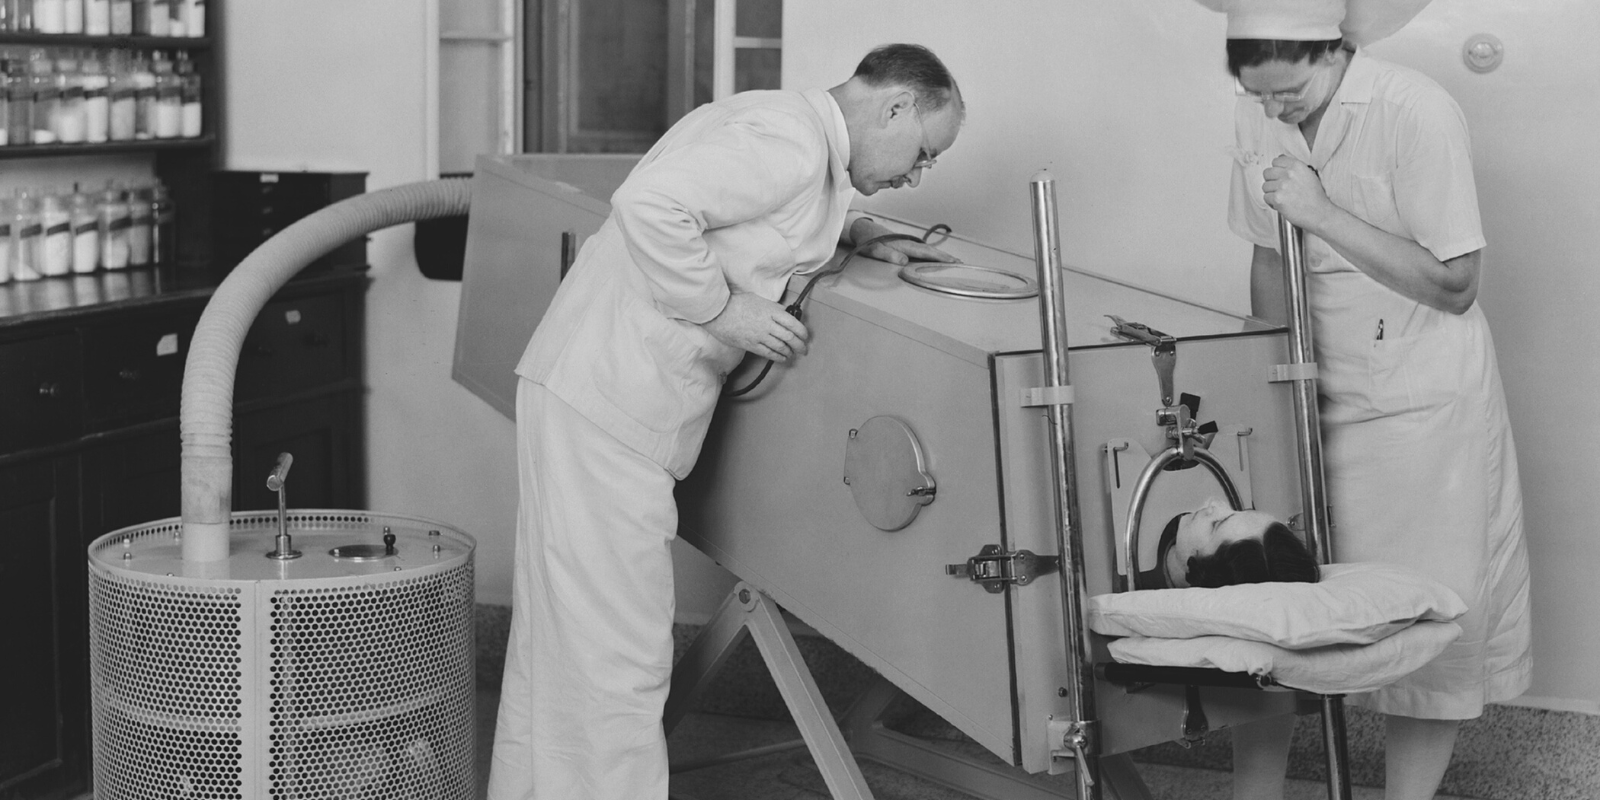 A black and white photograph from around the 1950s, with a doctor and nurse looking over a polio patient in an iron lung machine.